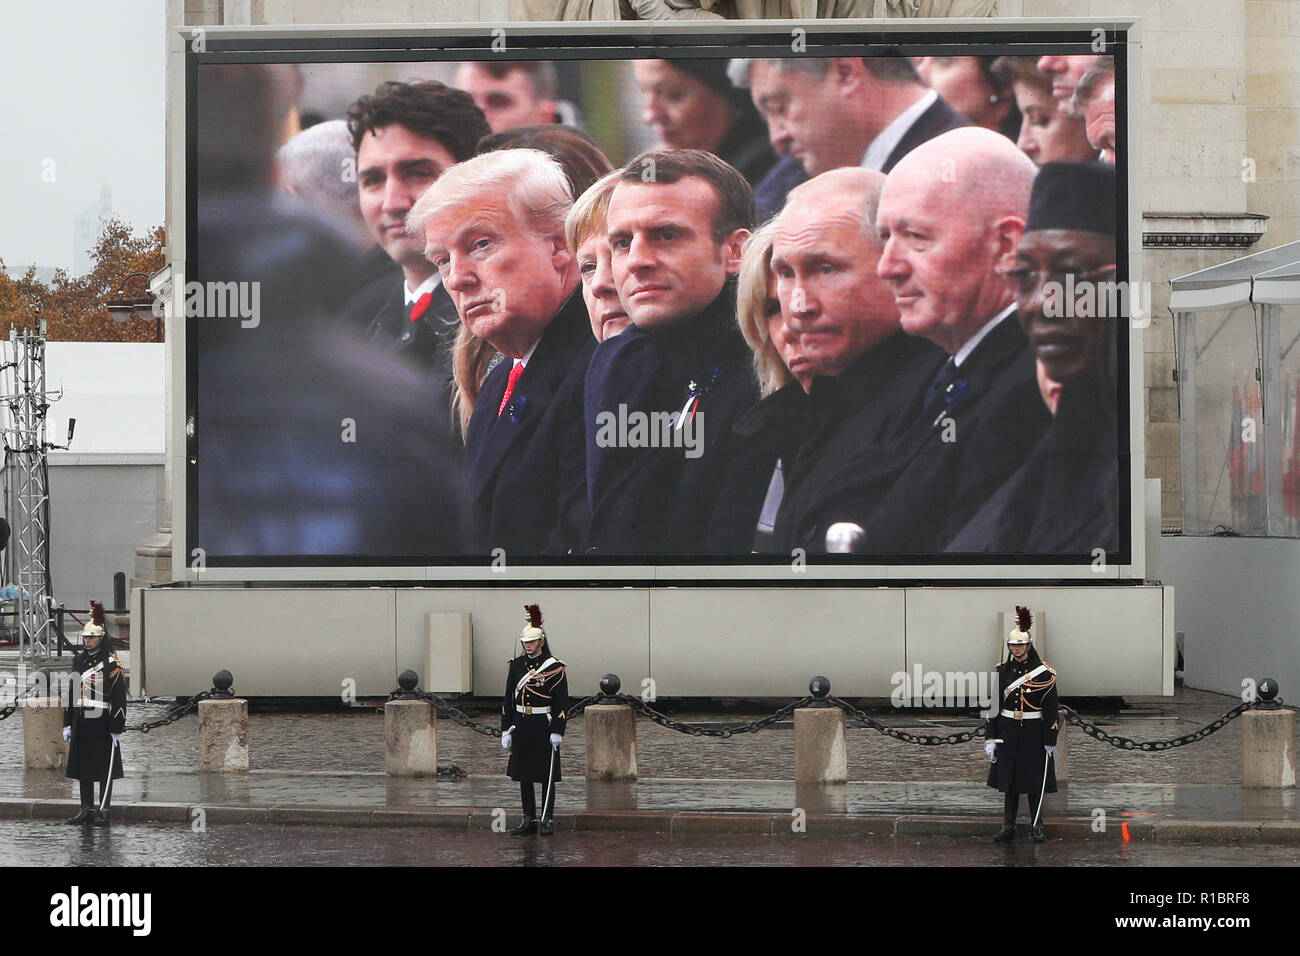 Paris, France. 11th Nov, 2018. A screen in front of the Arc de Triomphe shows the US President Donald Trump, German Chancellor Angela Merkel, French President Emmanuel Macron, Russian President Vladimir Putin and other politicians attend the ceremony to commemorate the 100th anniversary of the end of World War I in Paris, France, Nov. 11, 2018. Credit: Zheng Huansong/Xinhua/Alamy Live News Stock Photo